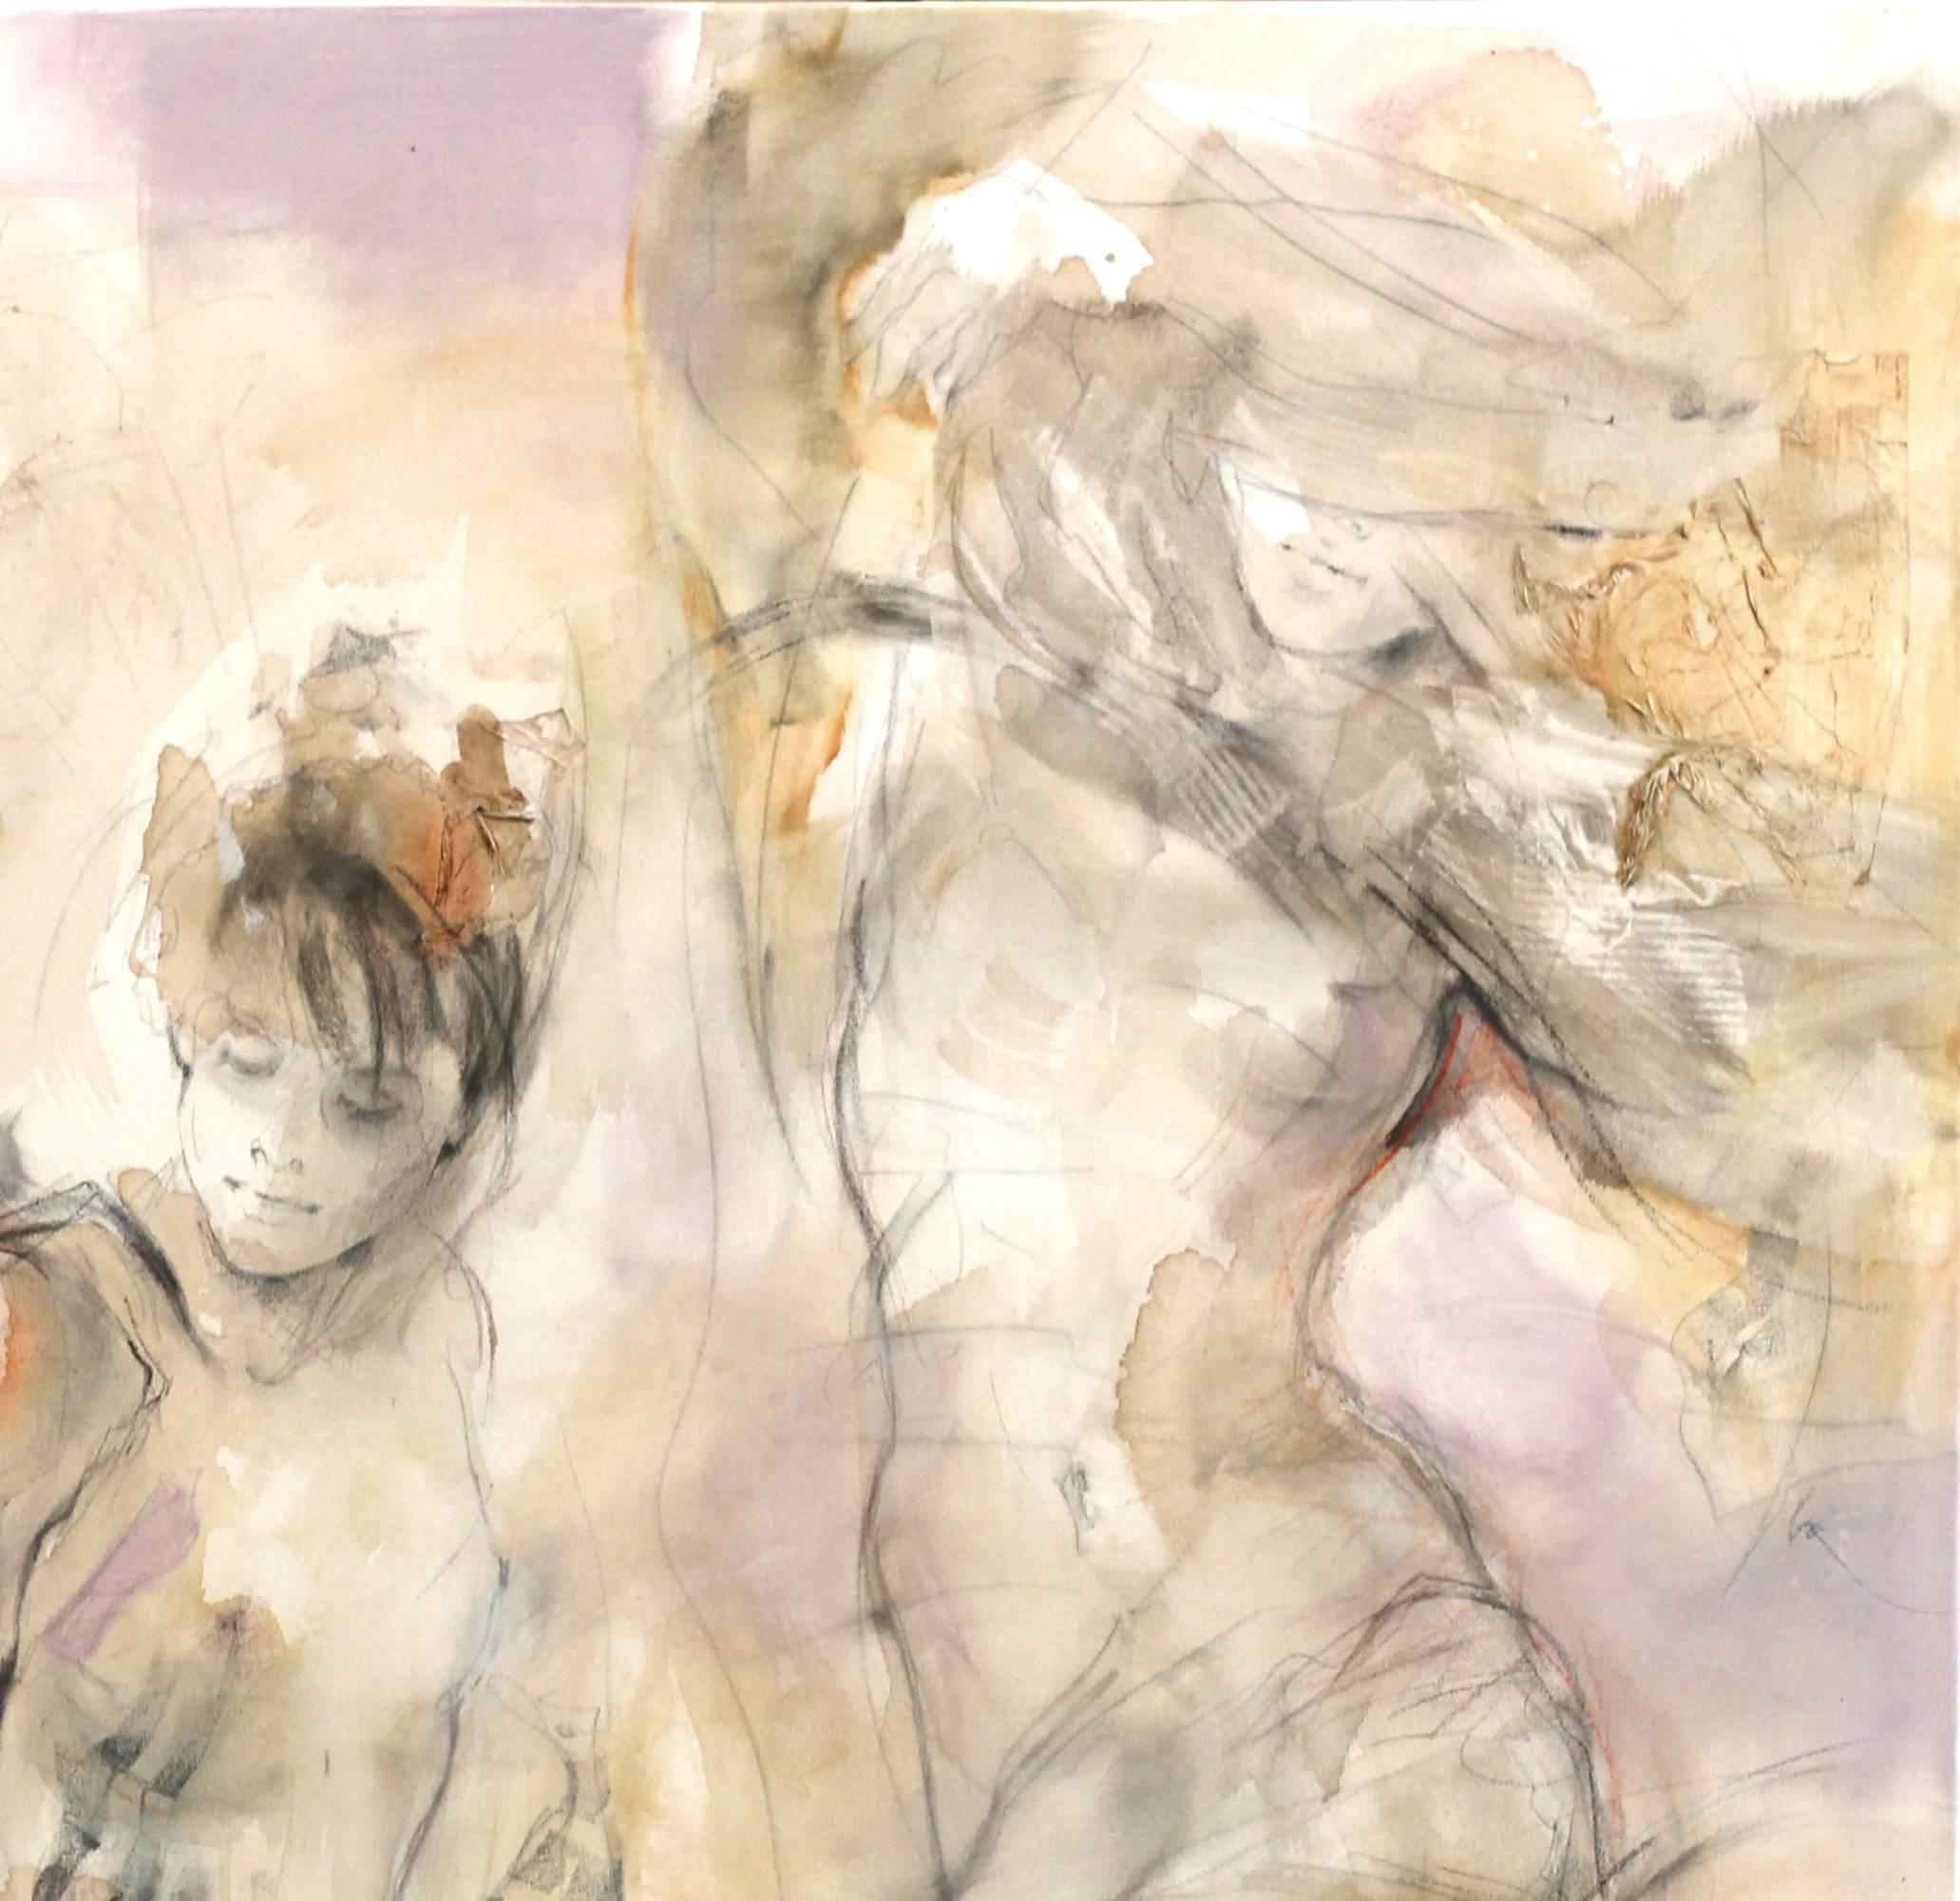 New Dresses - Soft Toned Sensitive Portrayal of Intimate Figures Graceful Nudes - Beige Figurative Painting by Gabriele Mierzwa